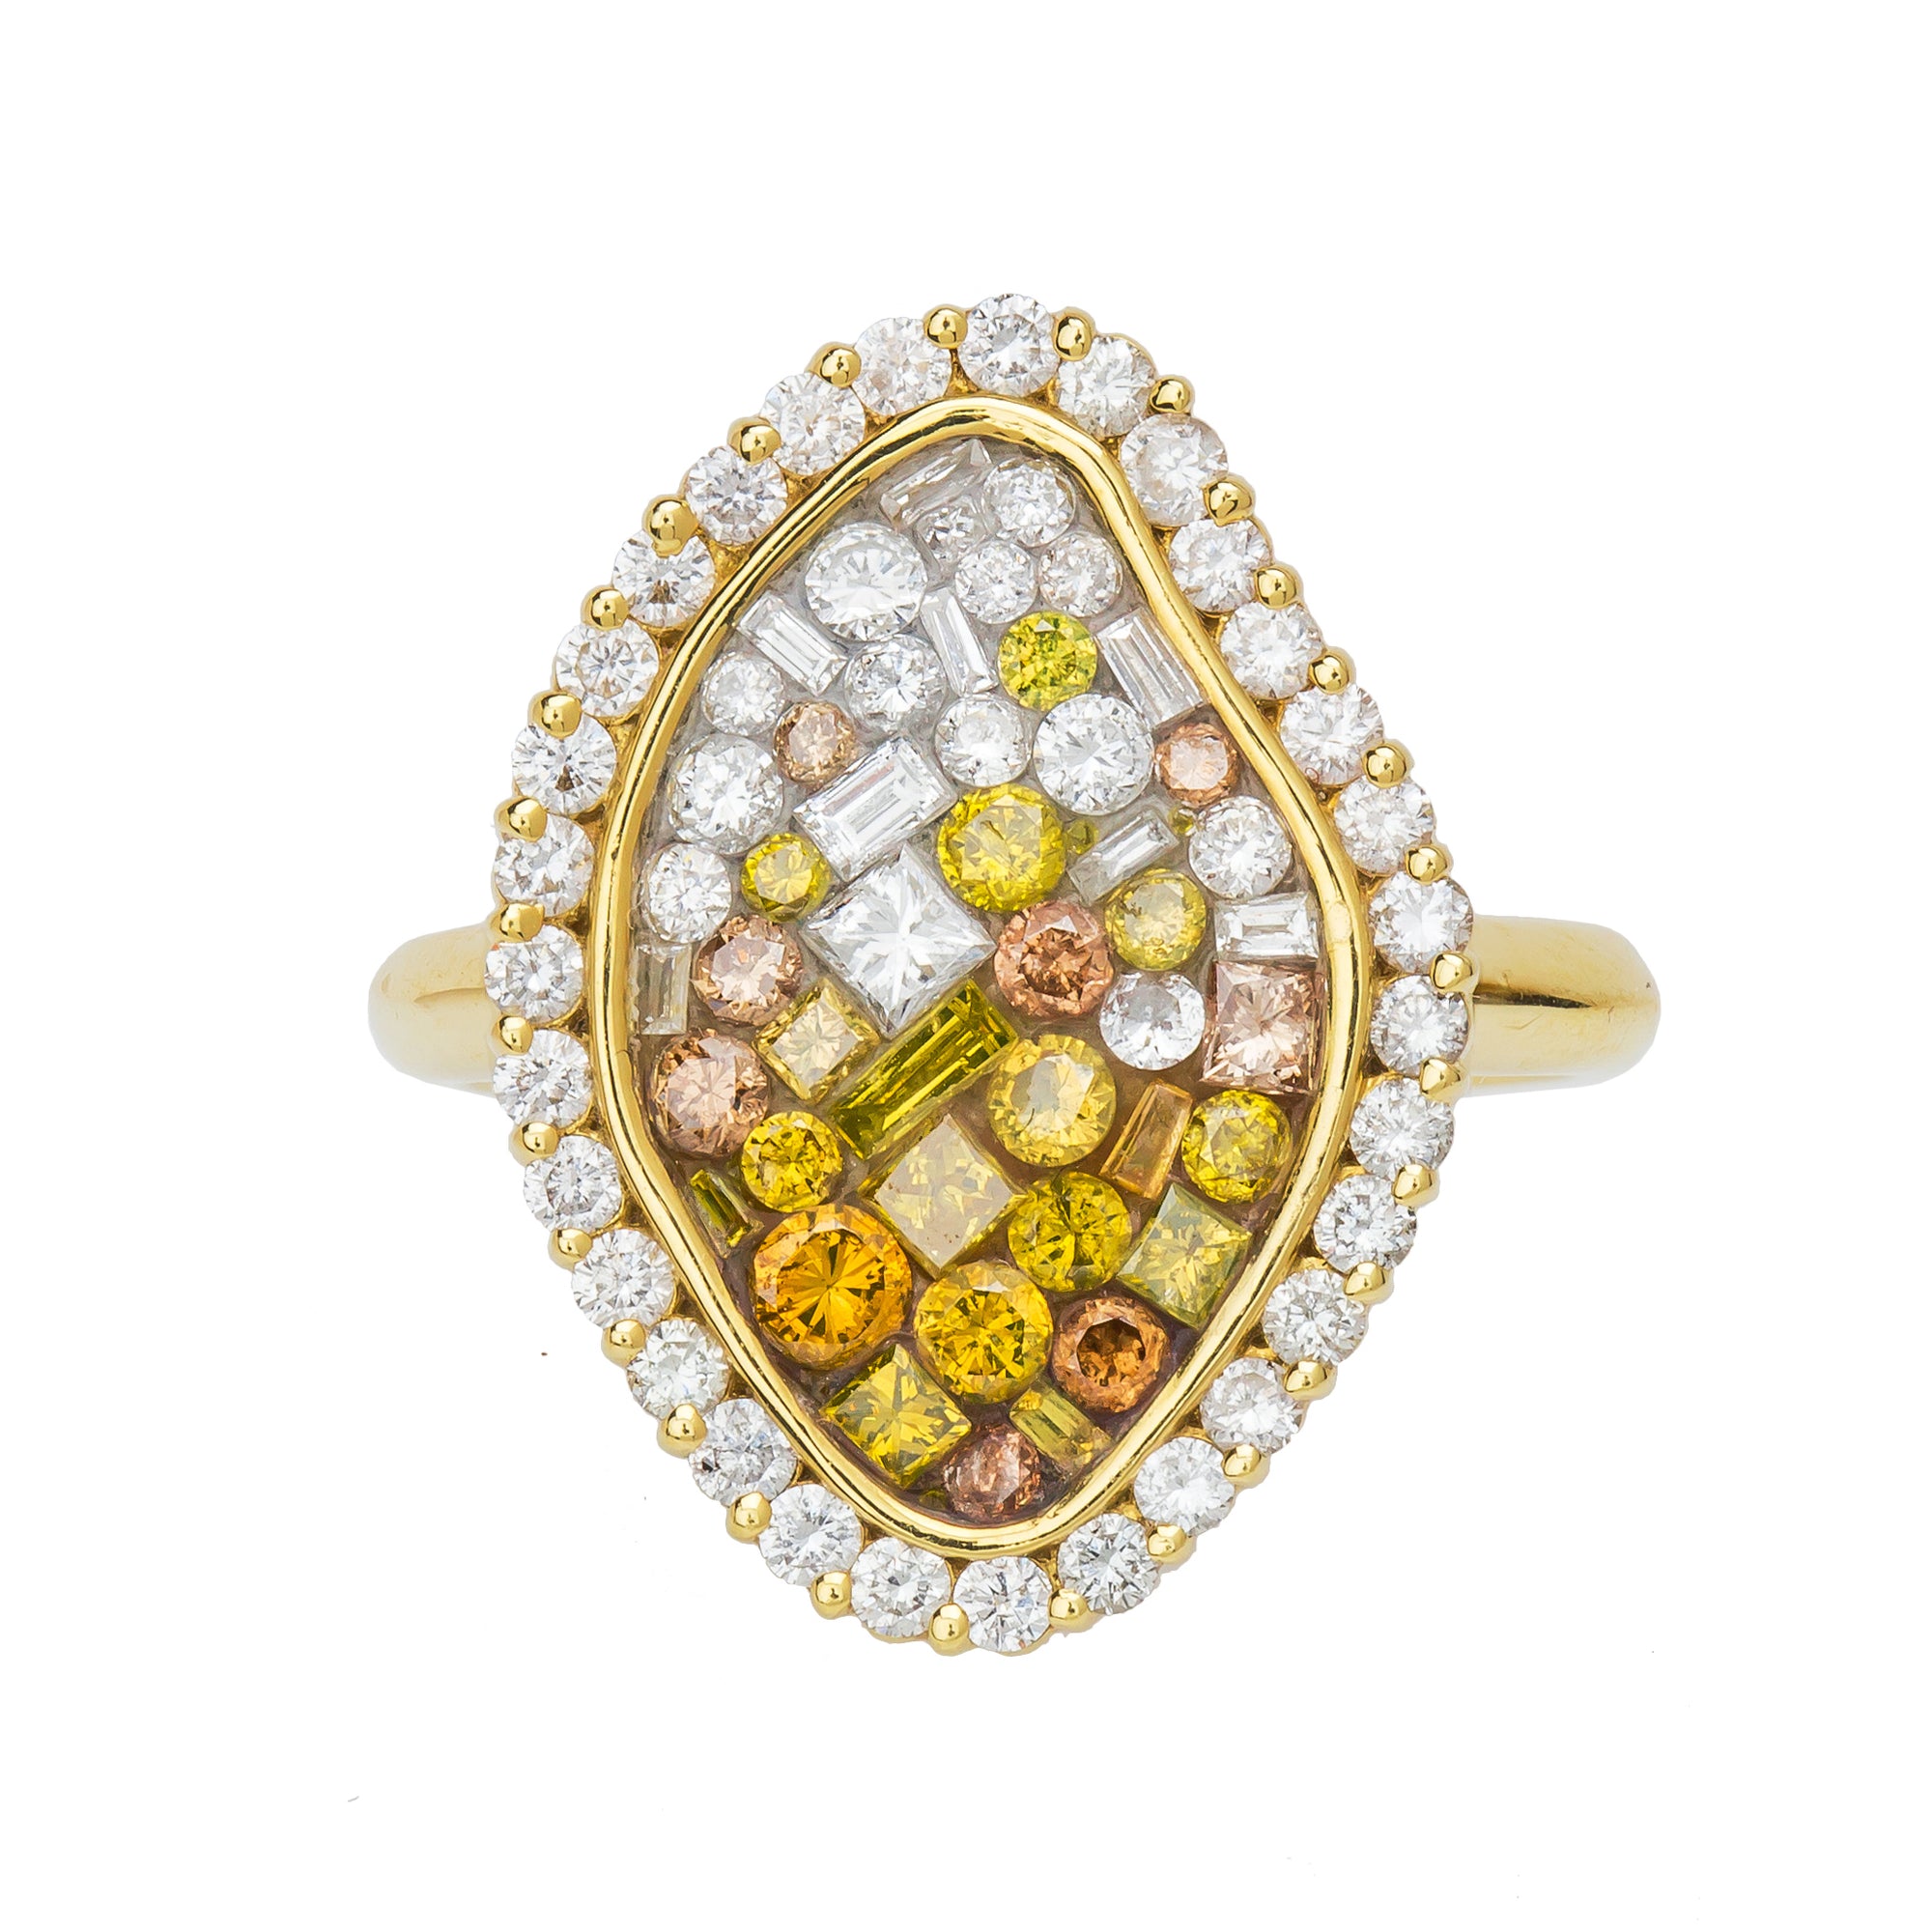 Yellow Ombre Diamond Sarah Ring by Pleve available at Talisman Collection Fine Jewelers in El Dorado Hills, CA and online. Specs: 1.60 cttw white & color enhanced diamonds, 18k yellow gold.